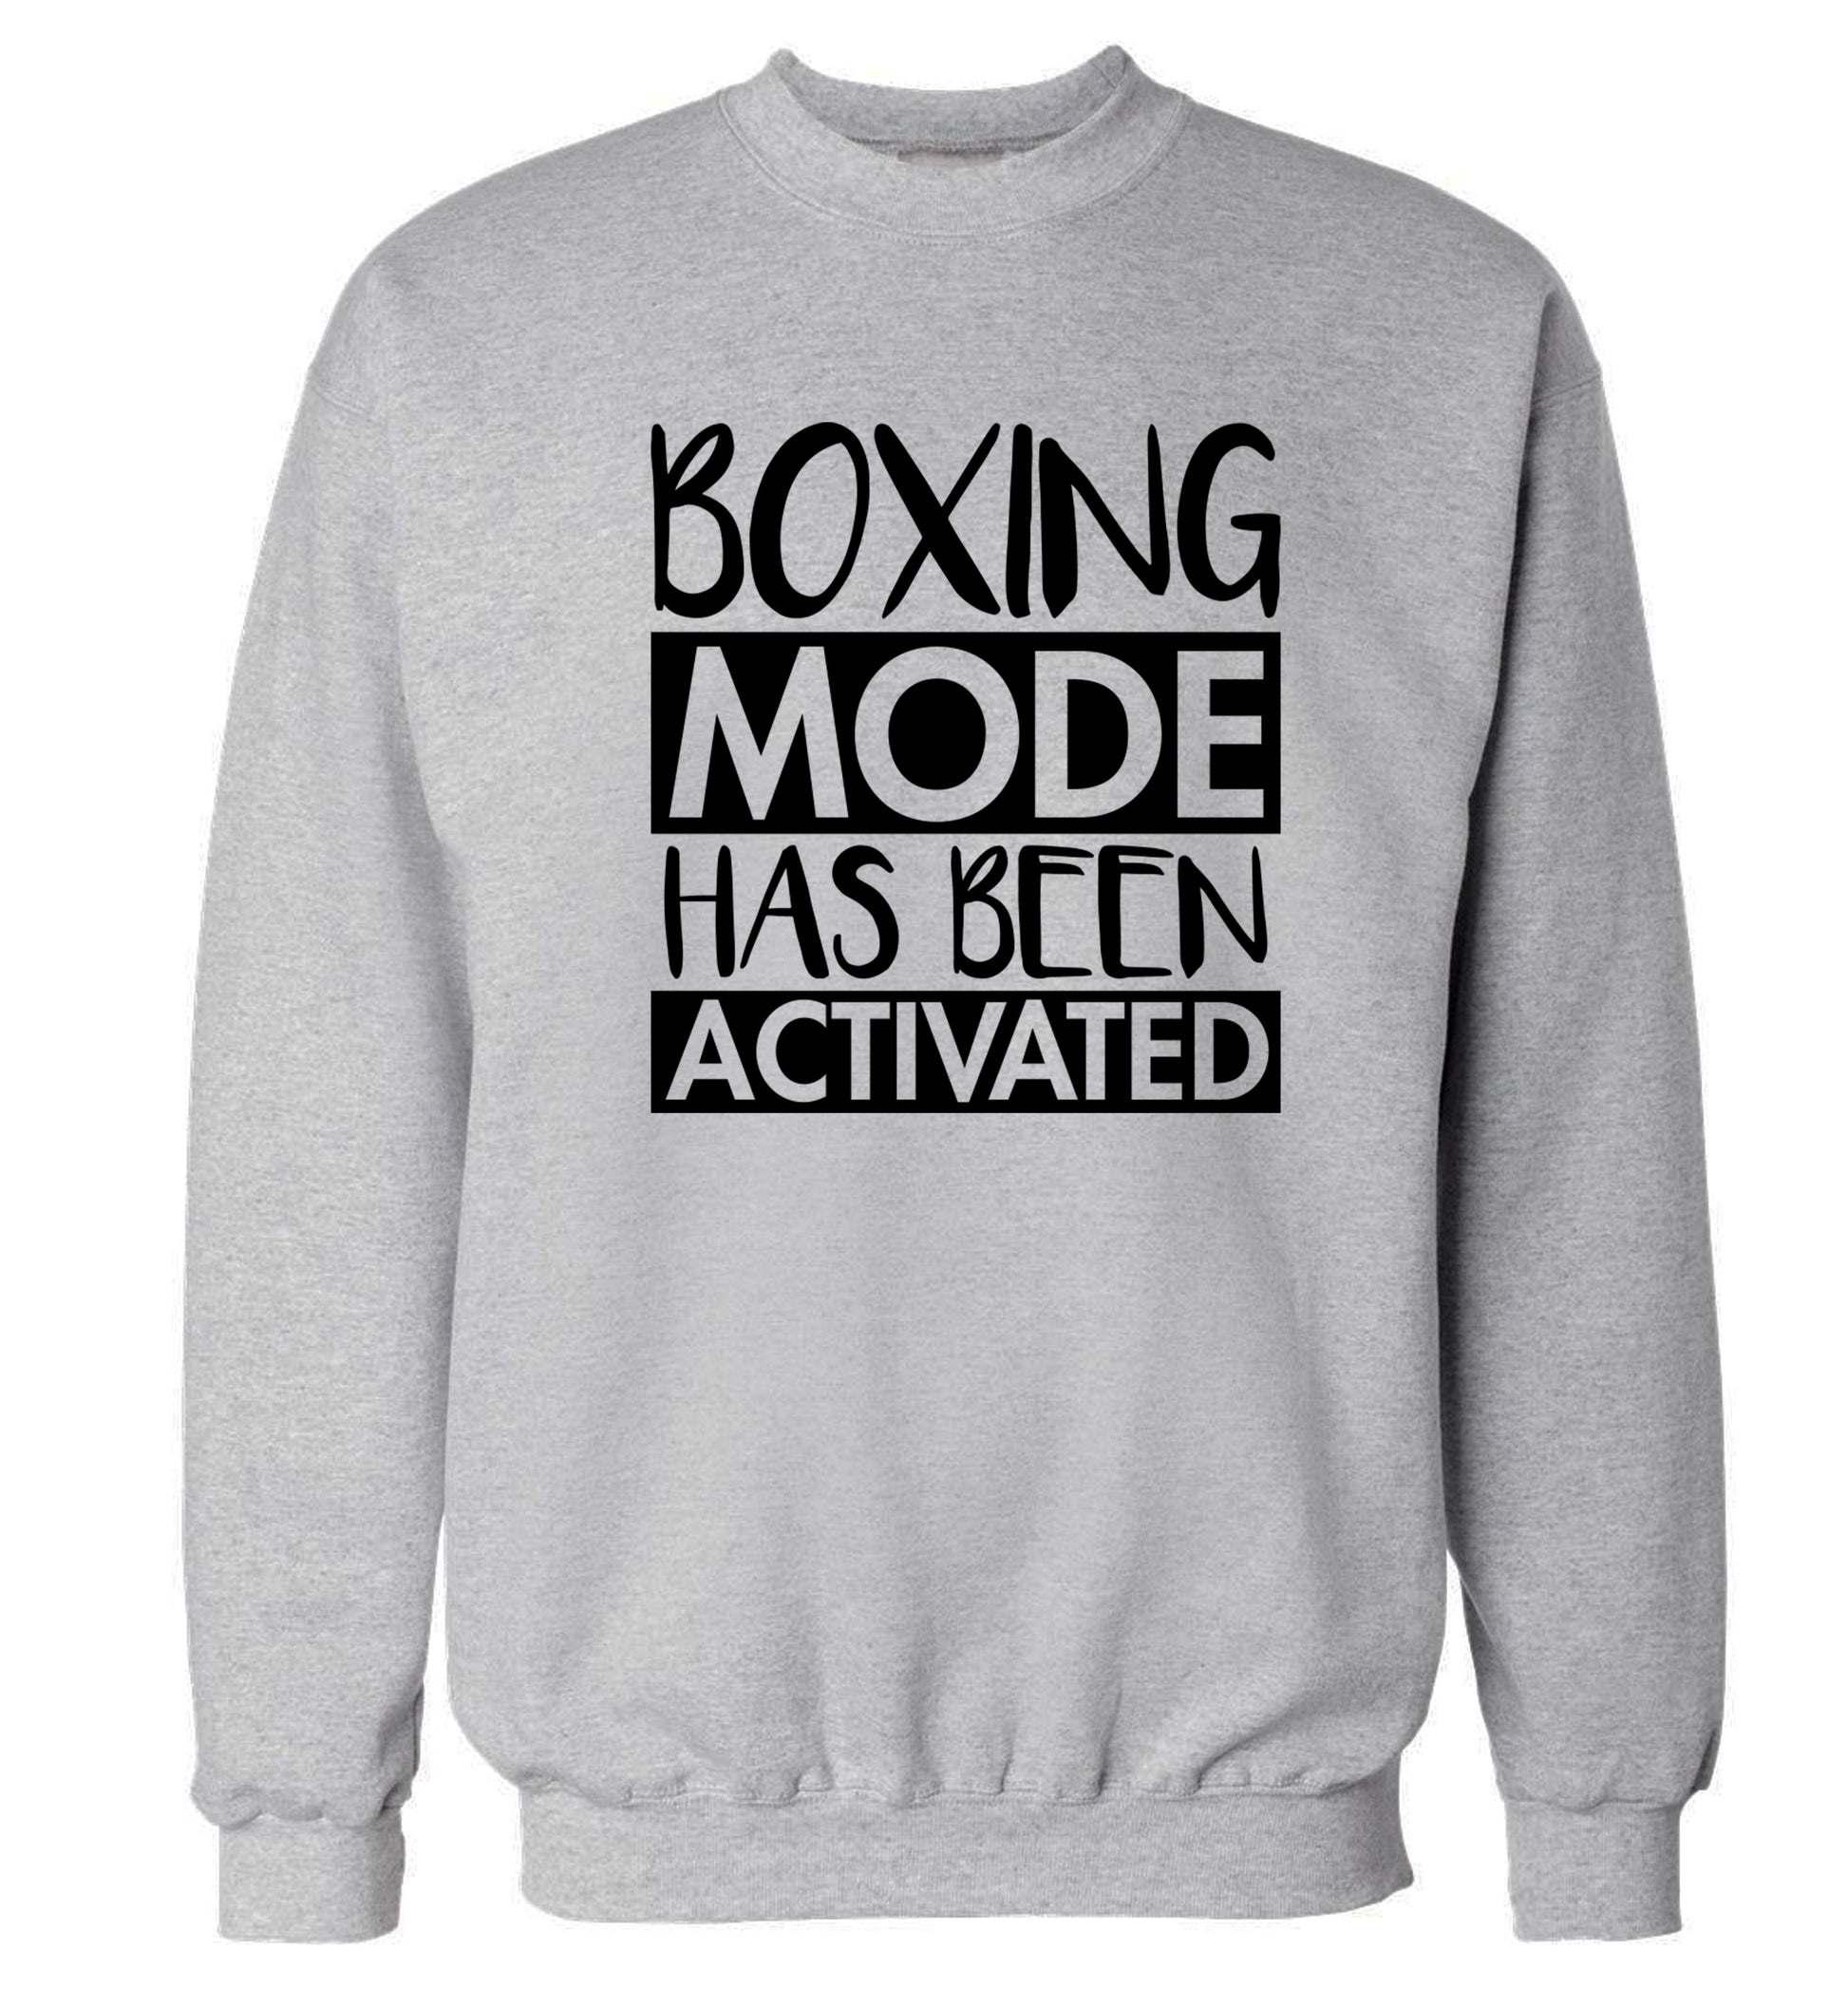 Boxing mode activated Adult's unisex grey Sweater 2XL